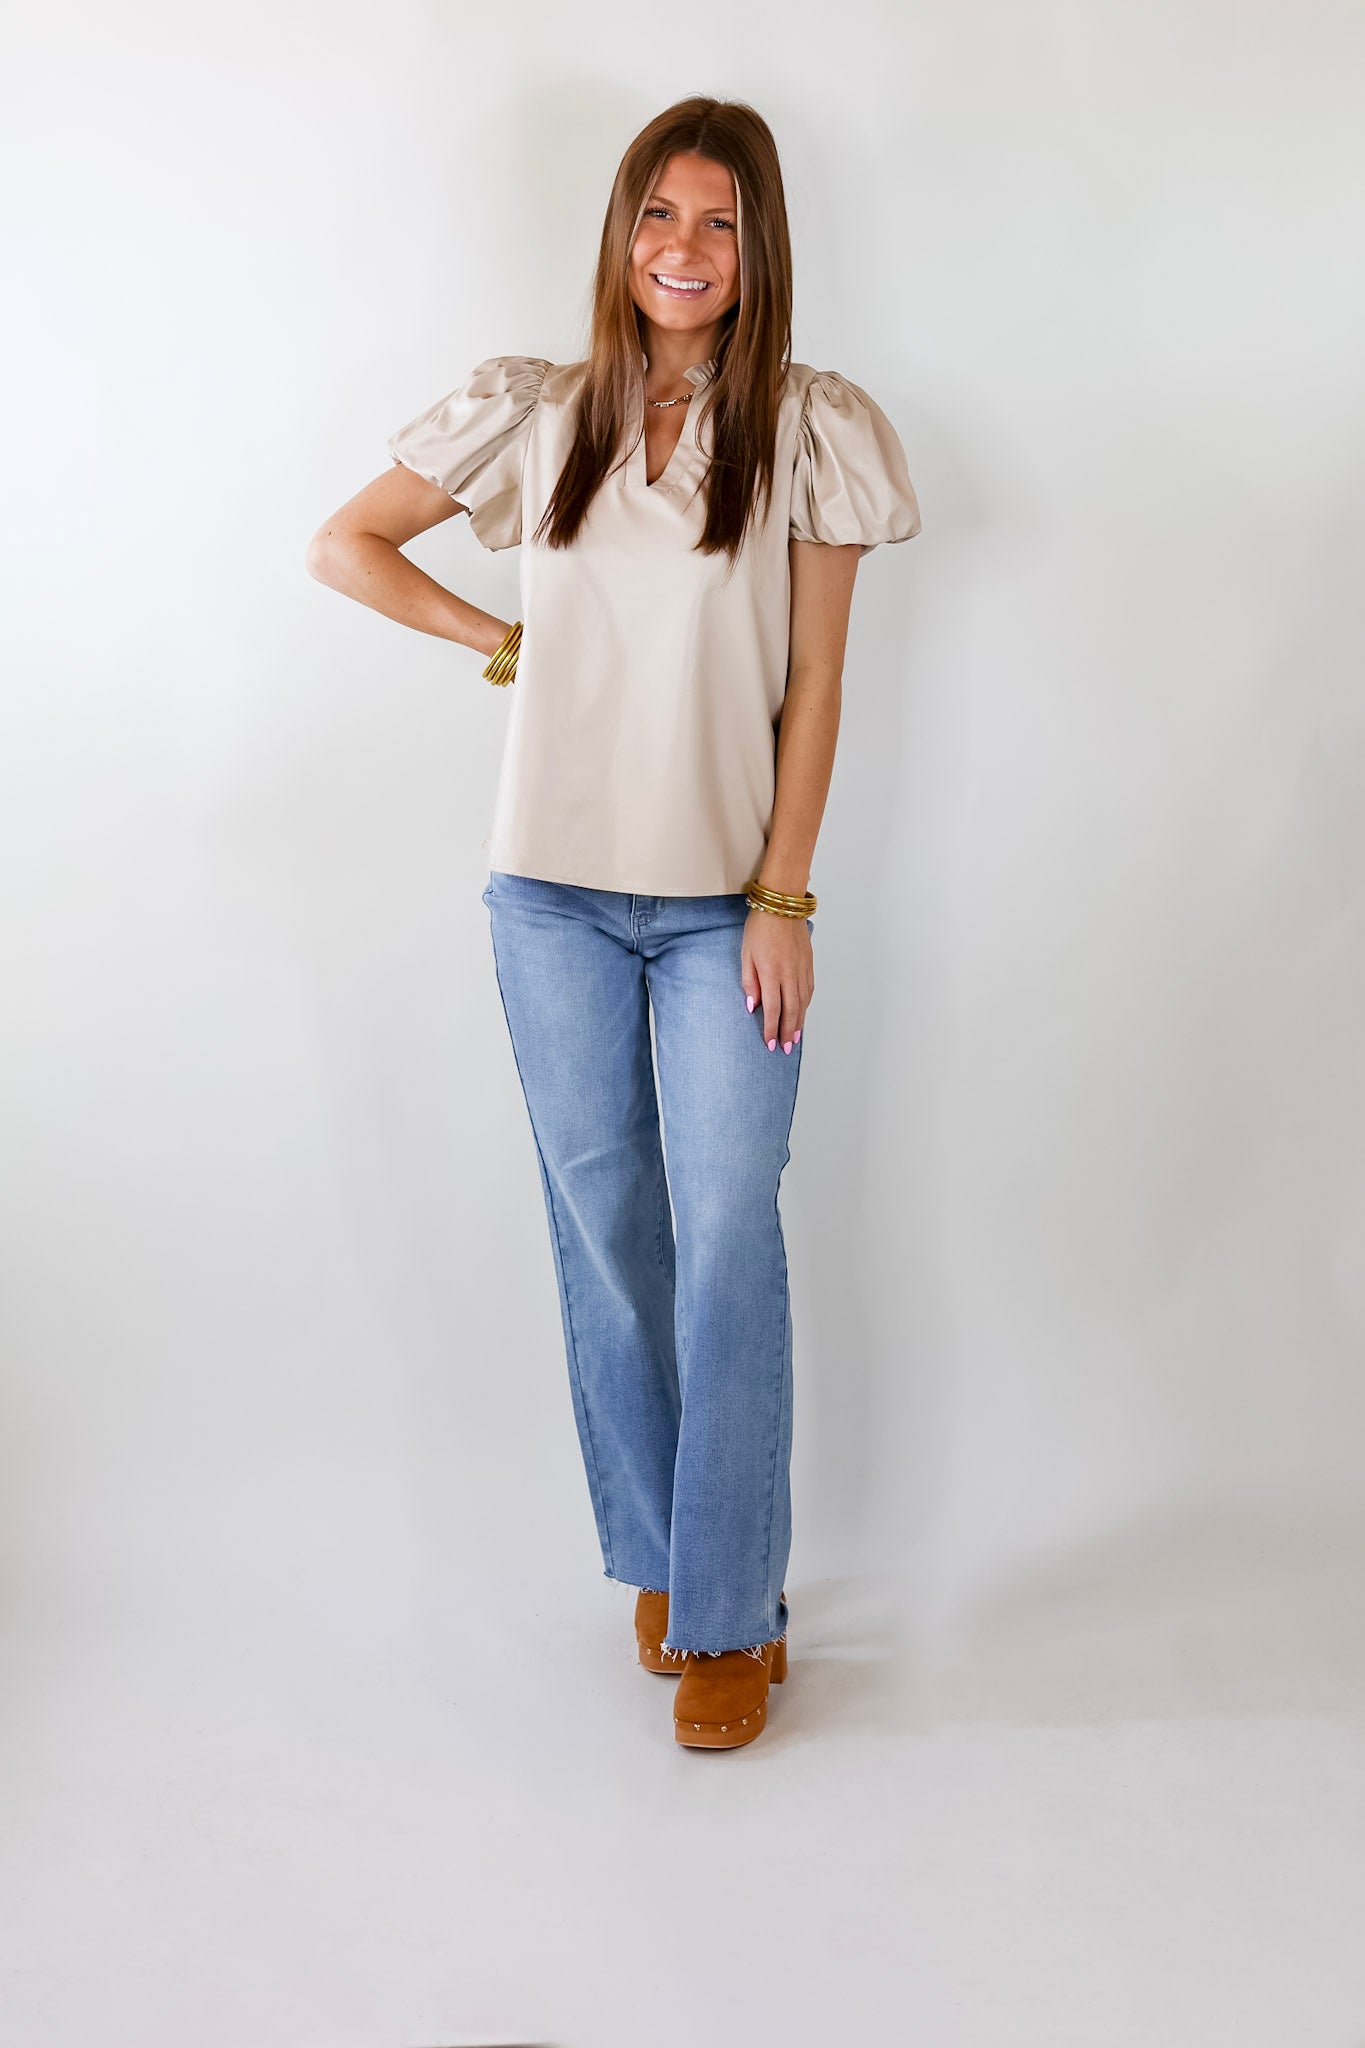 Replay The Night Faux Leather Top with Short Balloon Sleeves in Beige - Giddy Up Glamour Boutique